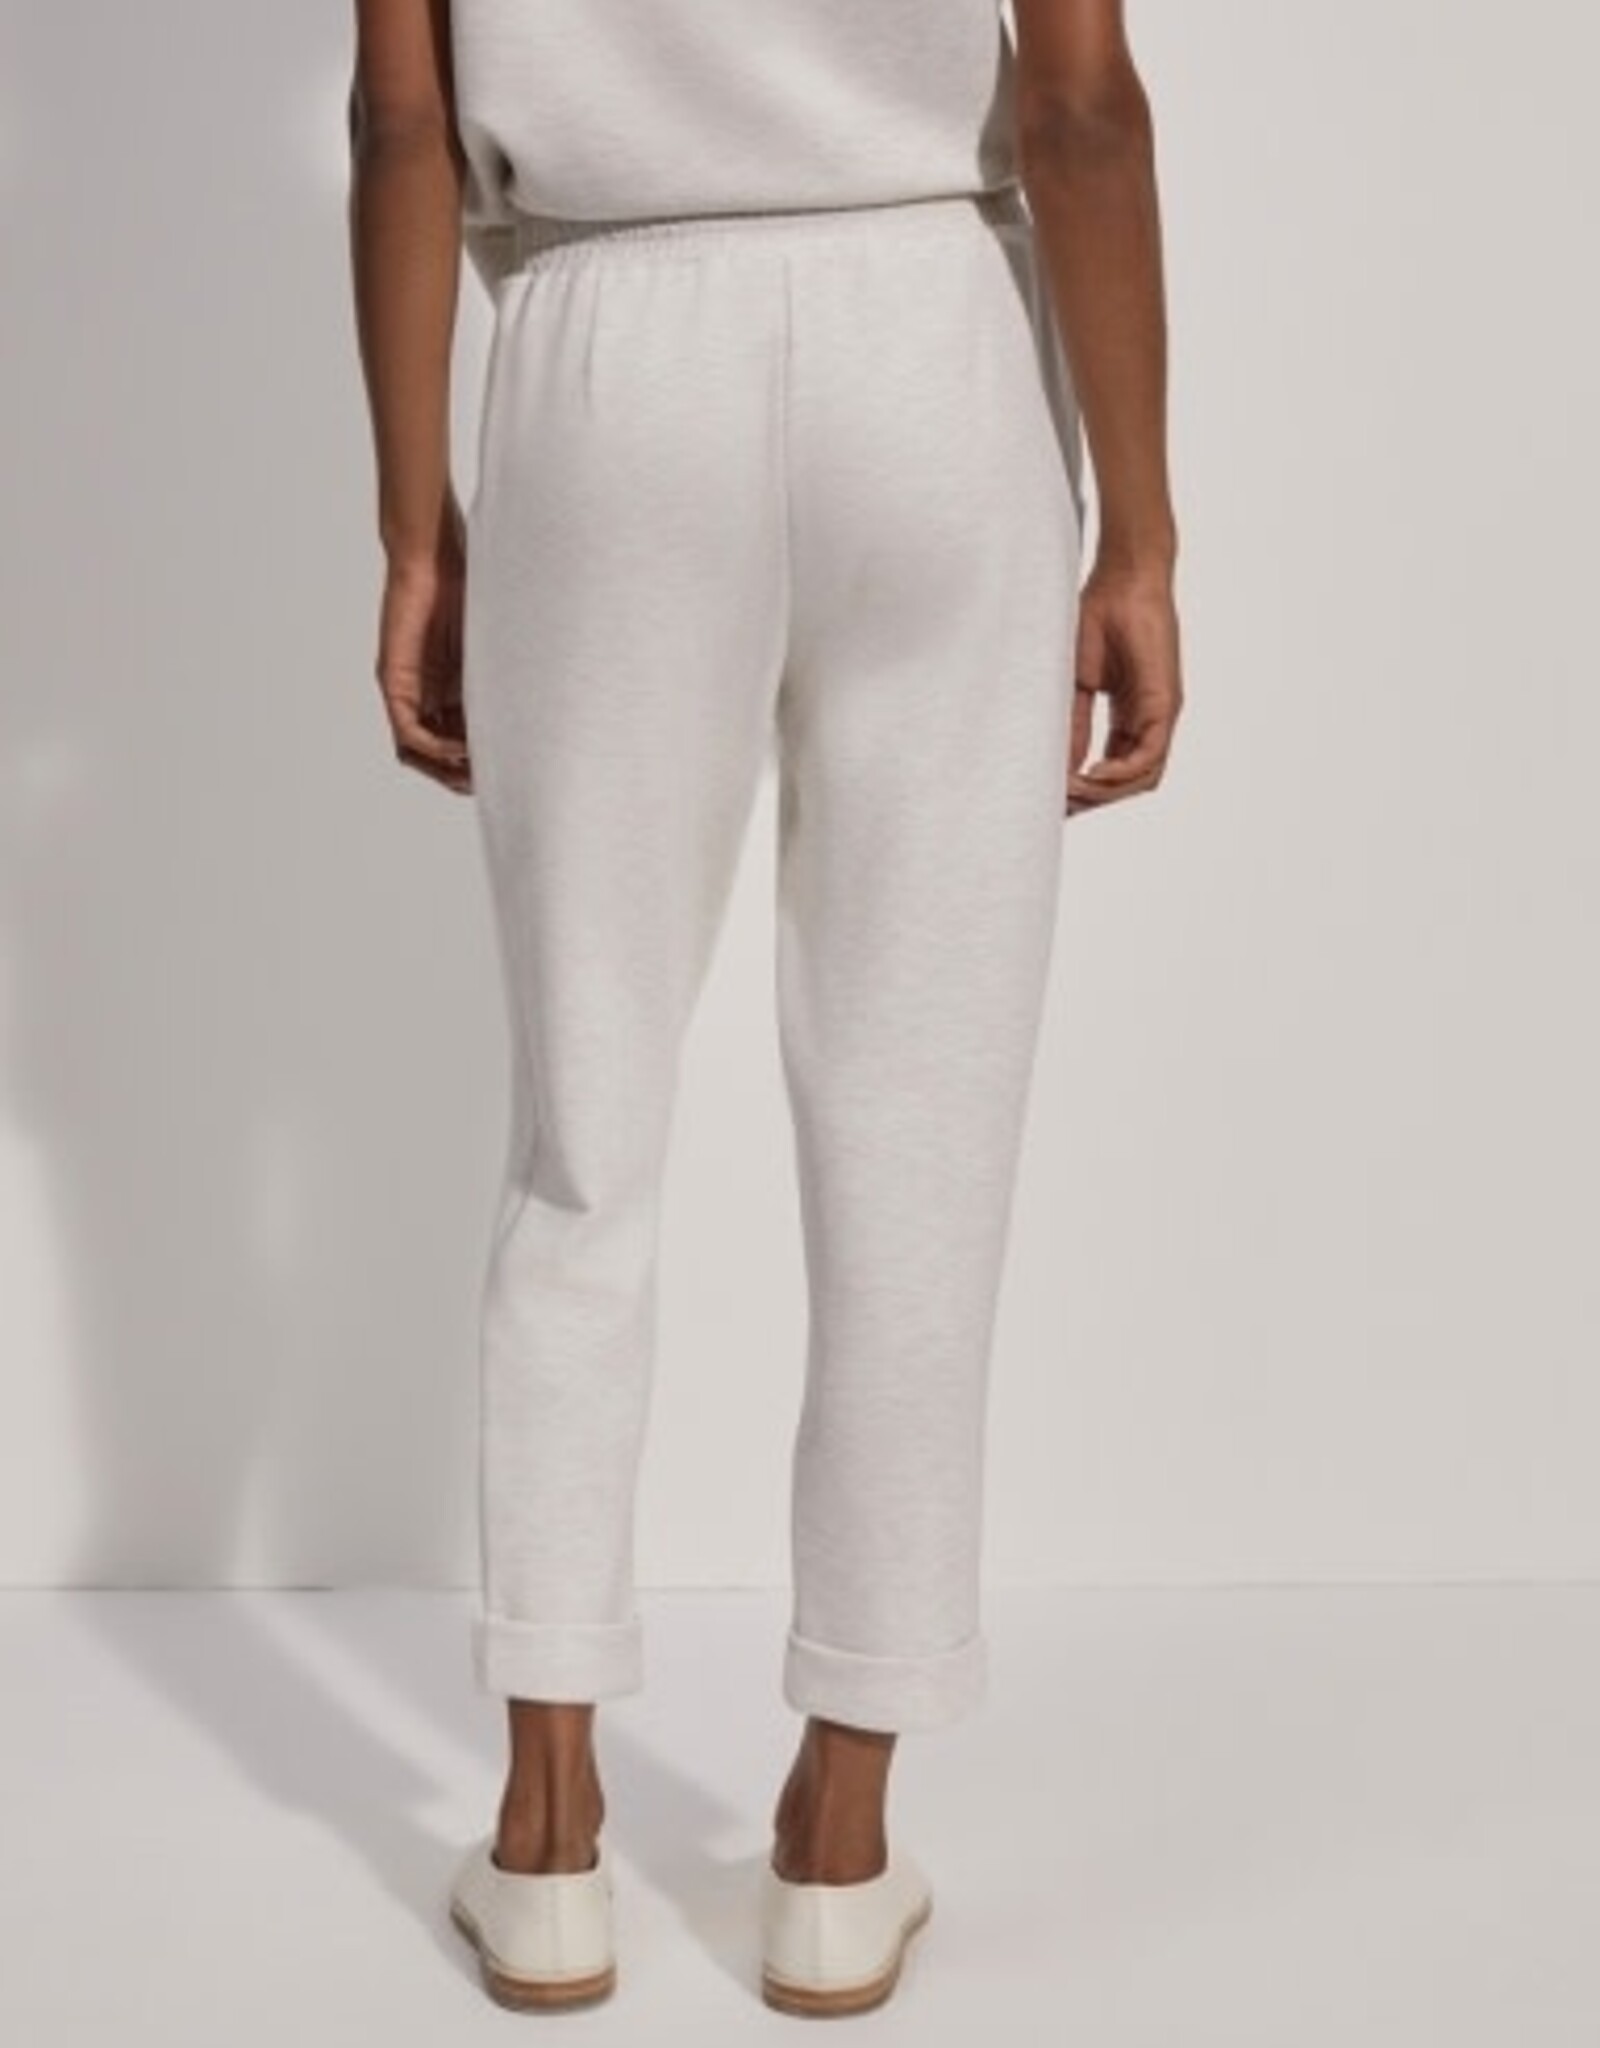 VARLEY ROLLED CUFF PANT